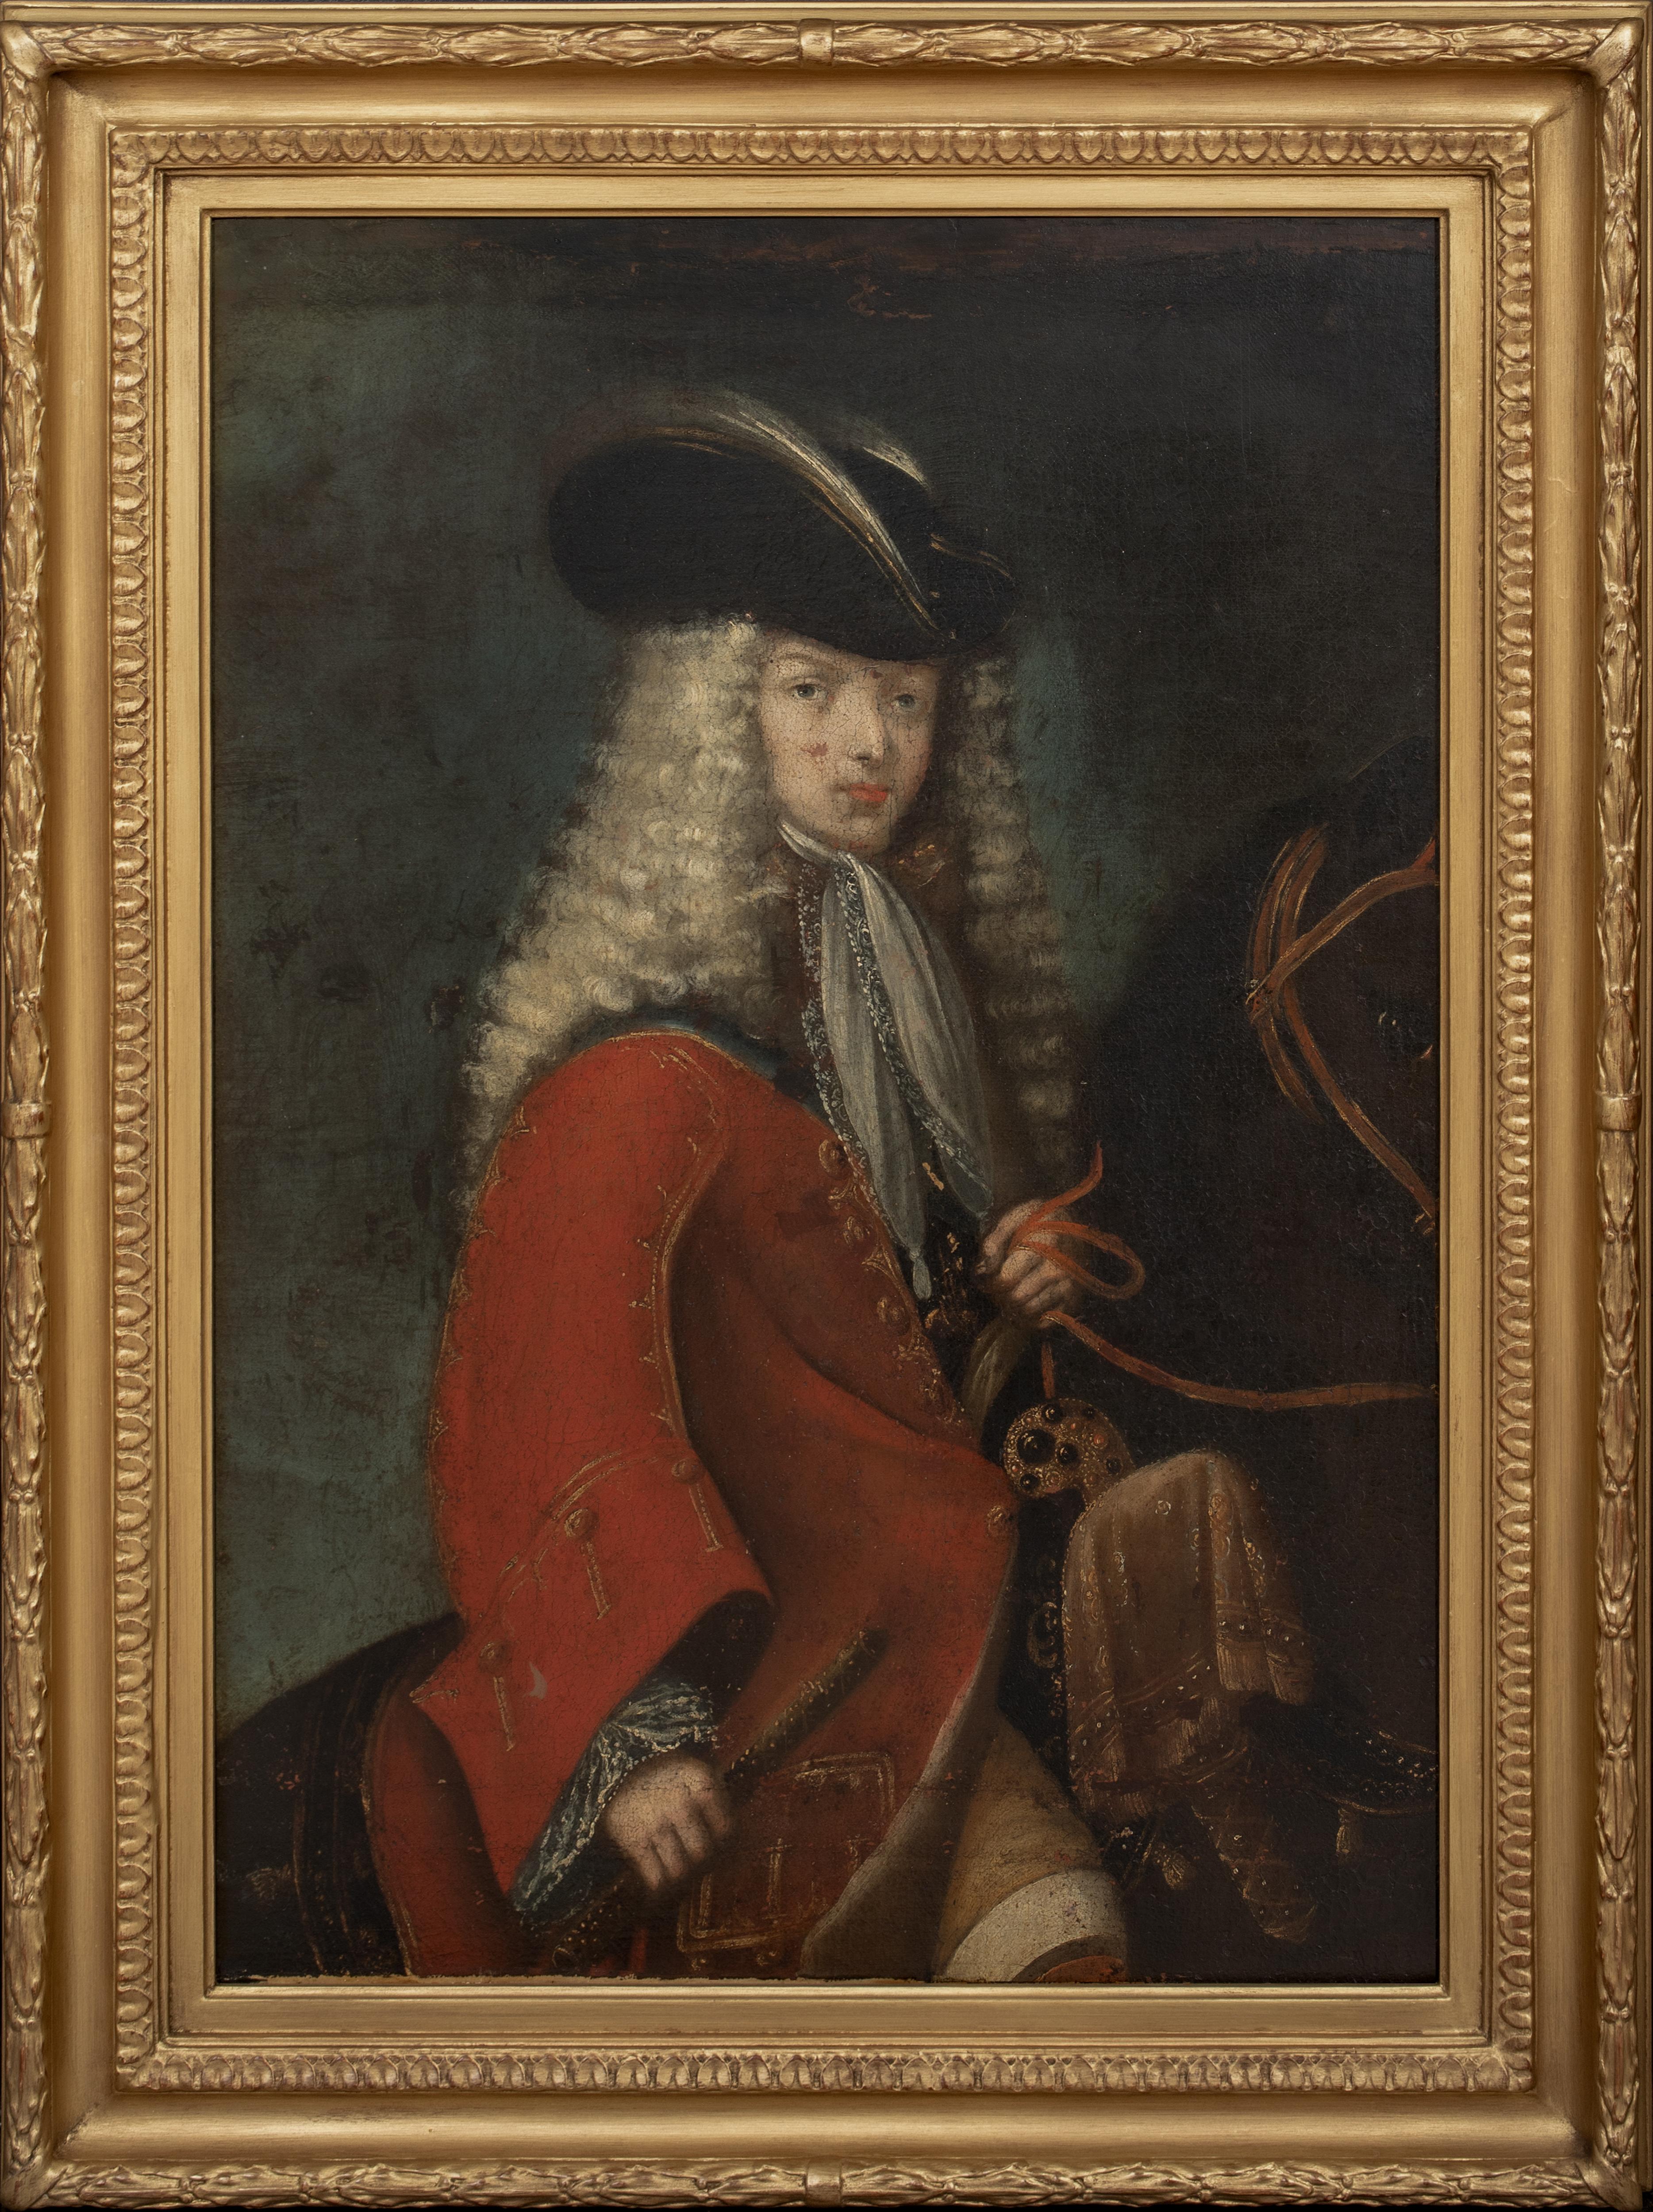 Unknown Portrait Painting - Portrait Of King Philip V (1683-1746) of Spain, 18th Century   Spanish School